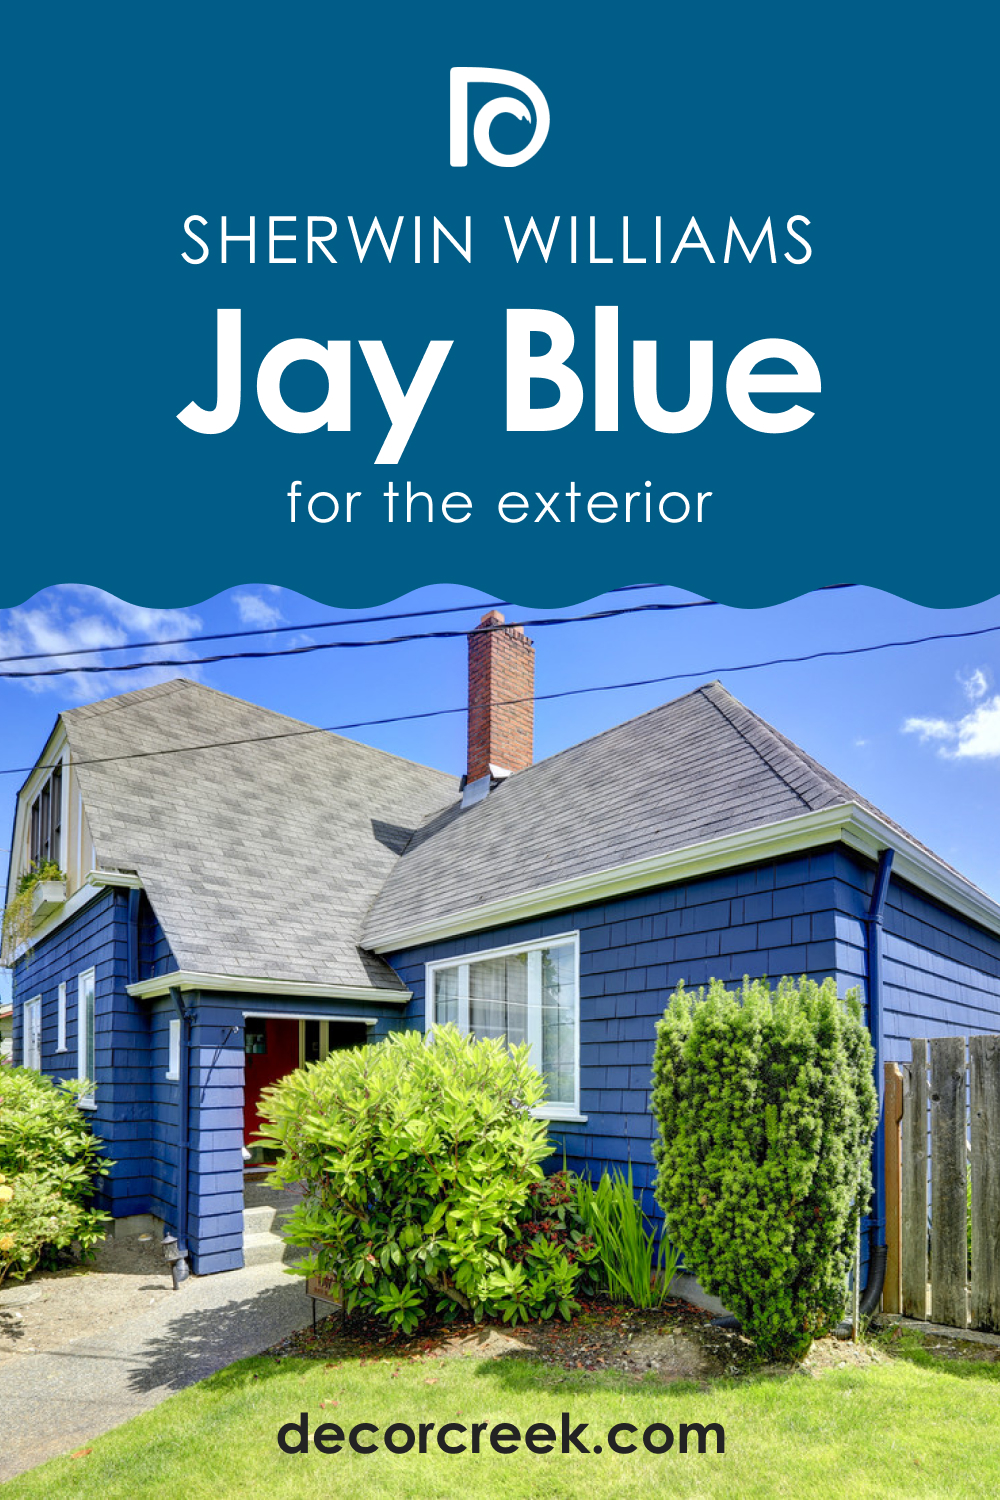 How to Use SW 6797 Jay Blue for an Exterior?